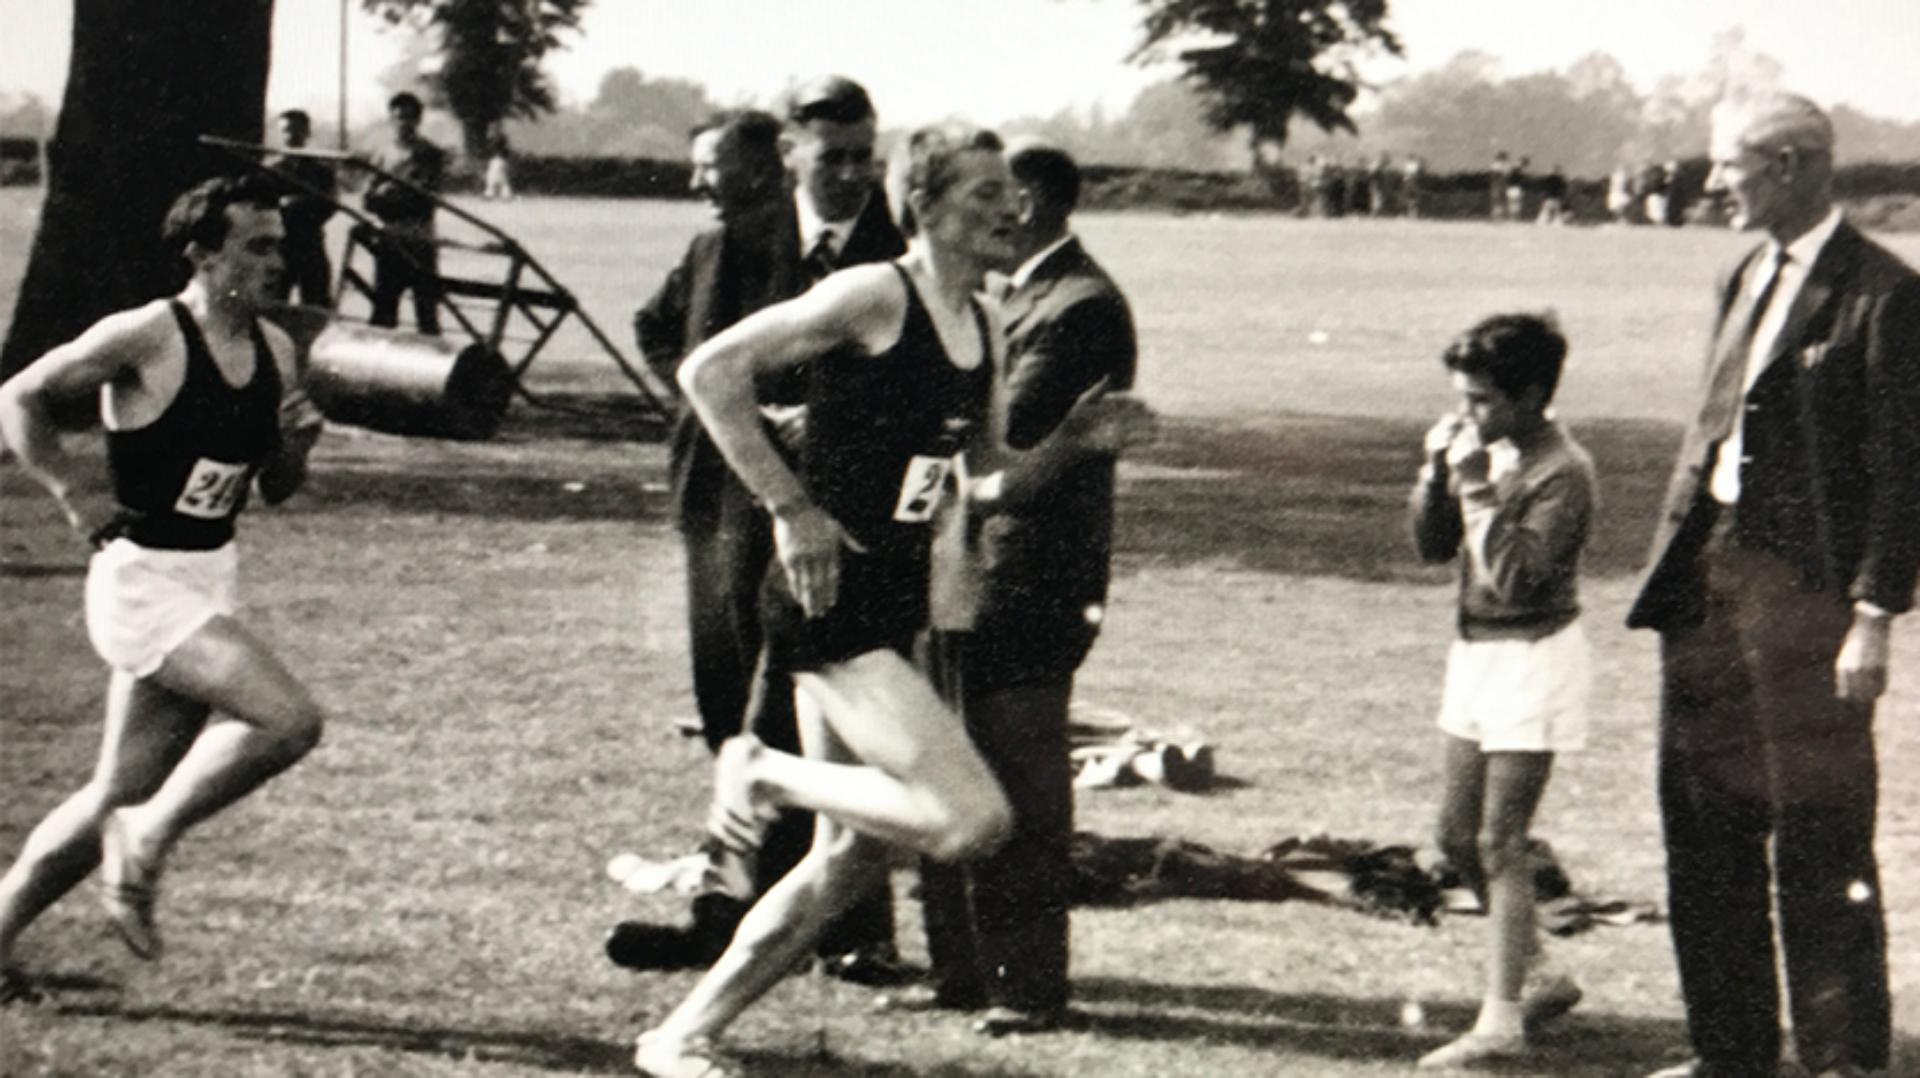 James Dyson taking part in a running race